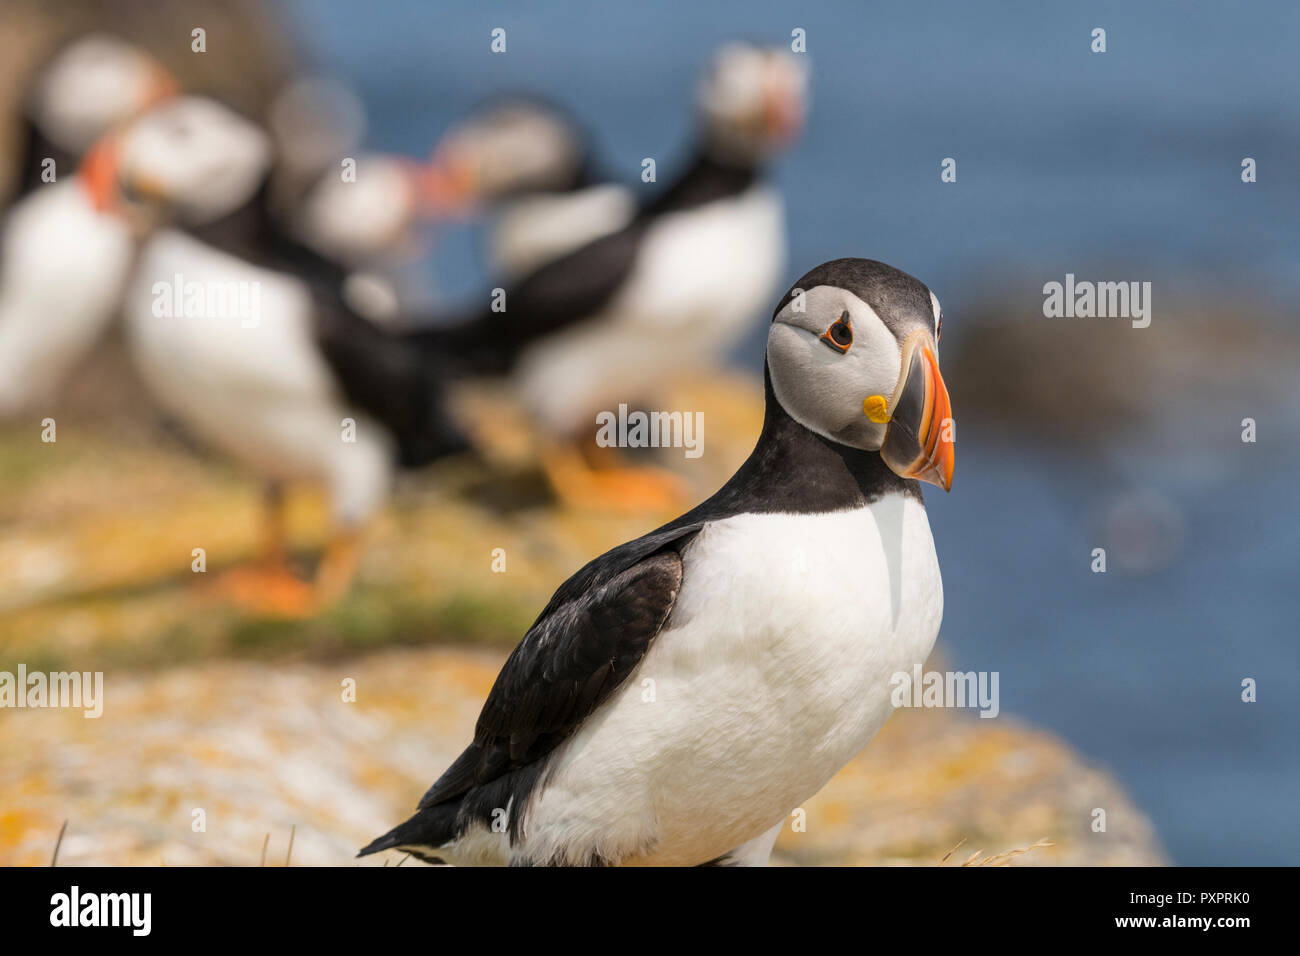 Atlantic Puffin colony at Elliston, Newfoundland, puffins close-up shot. single bird and small social groups Stock Photo